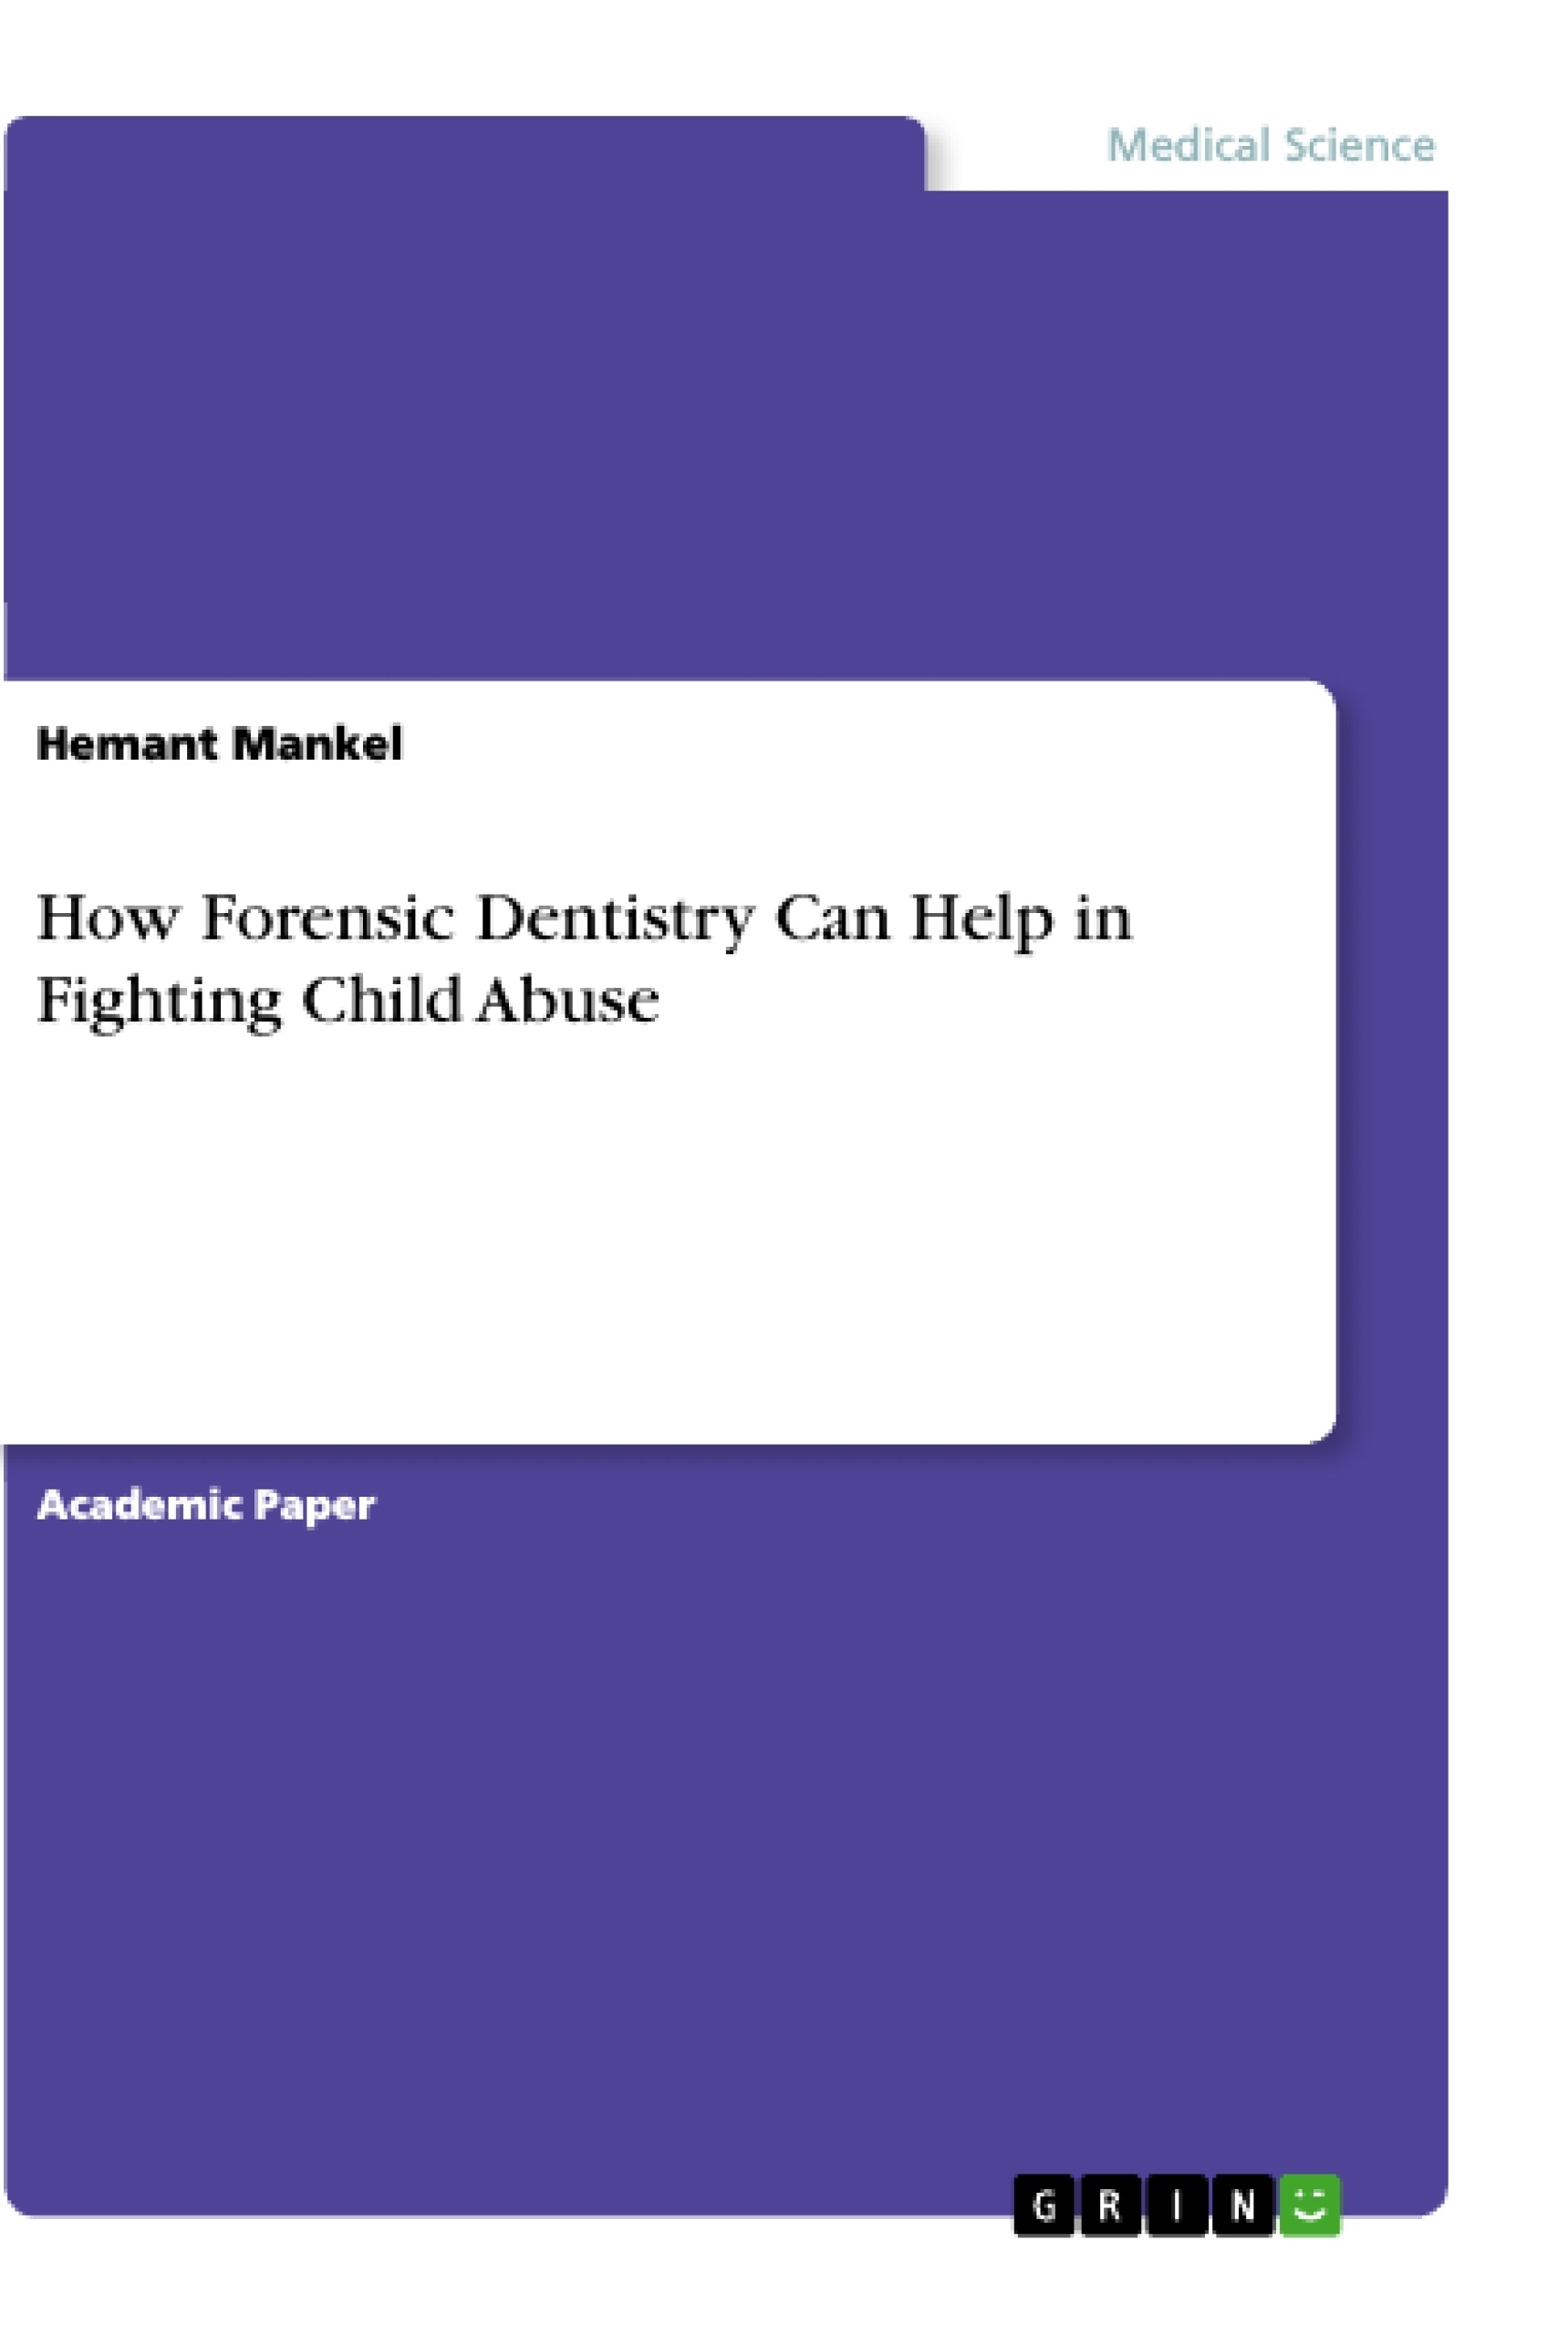 Titel: How Forensic Dentistry Can Help in Fighting Child Abuse